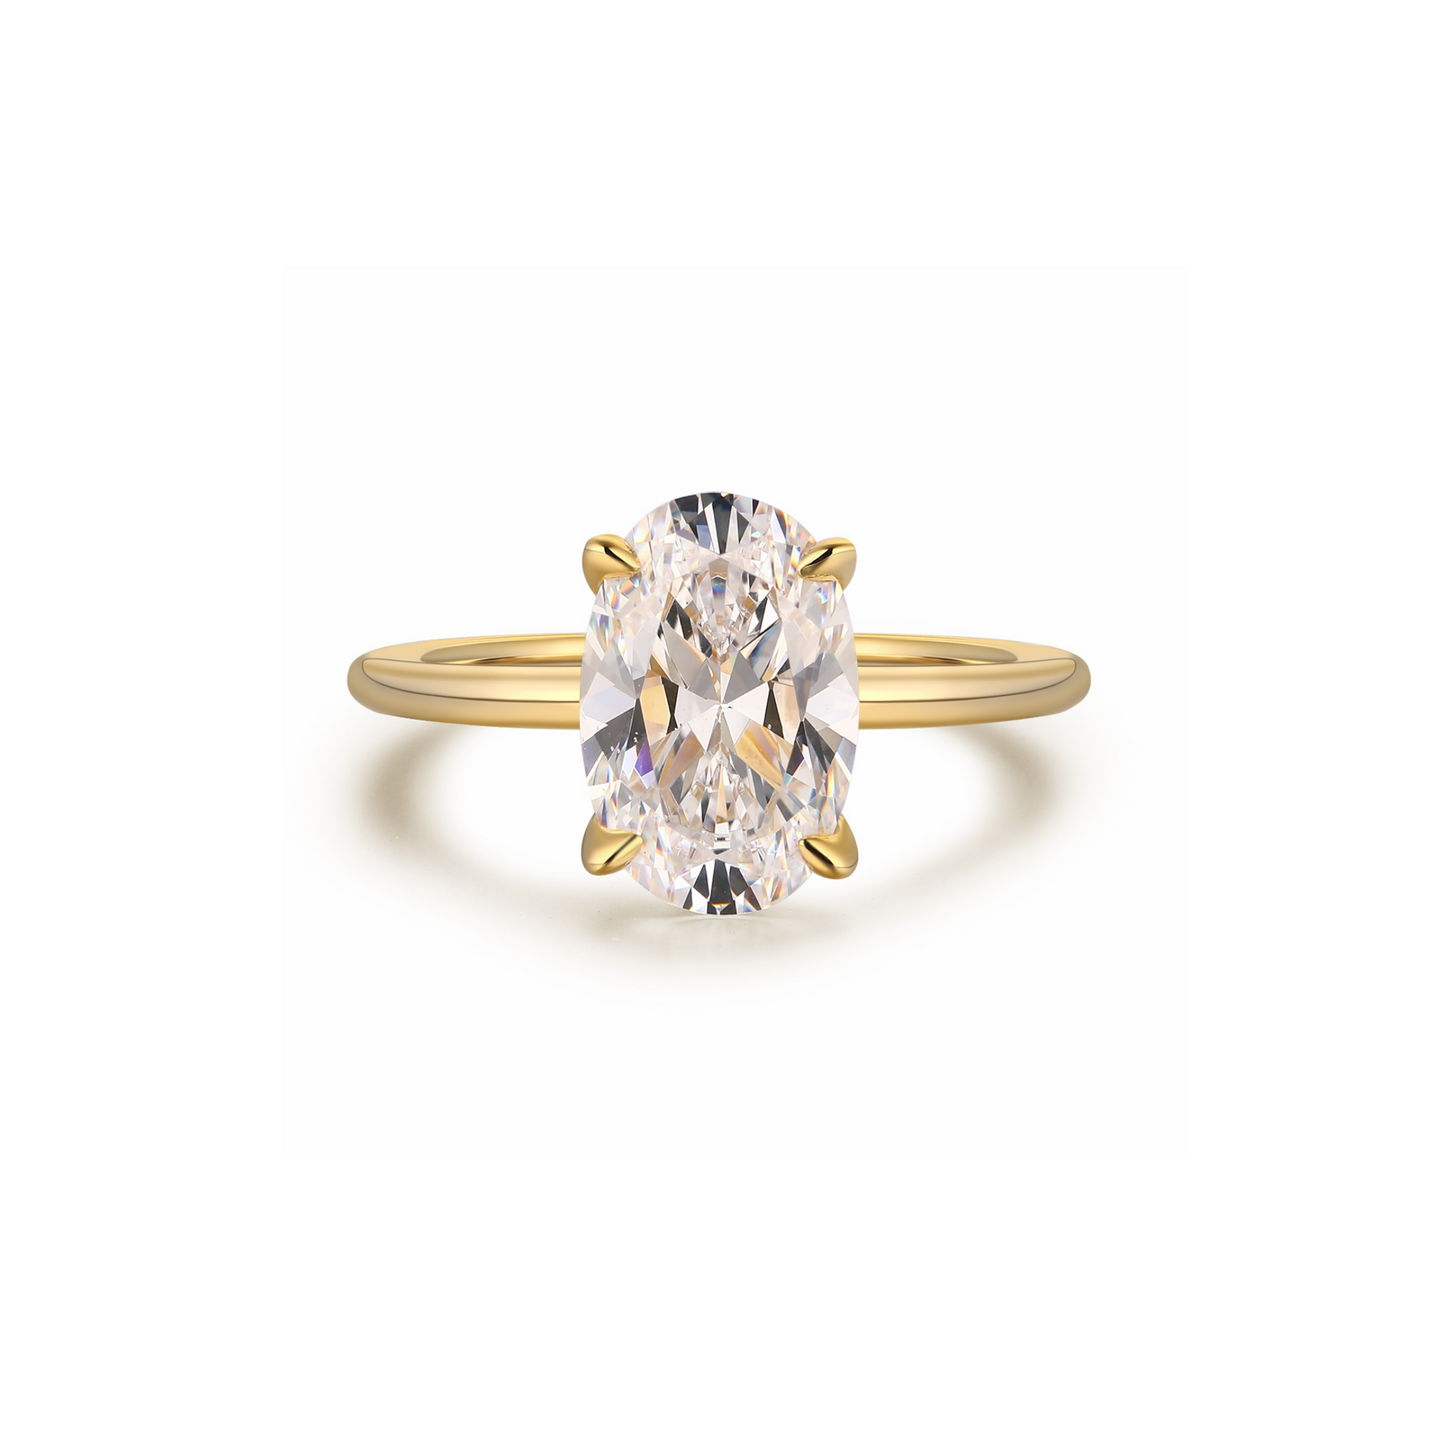 The Promise Ring Co. Oval Solitaire diamond simulant ring. In 18ct Gold Vermeil